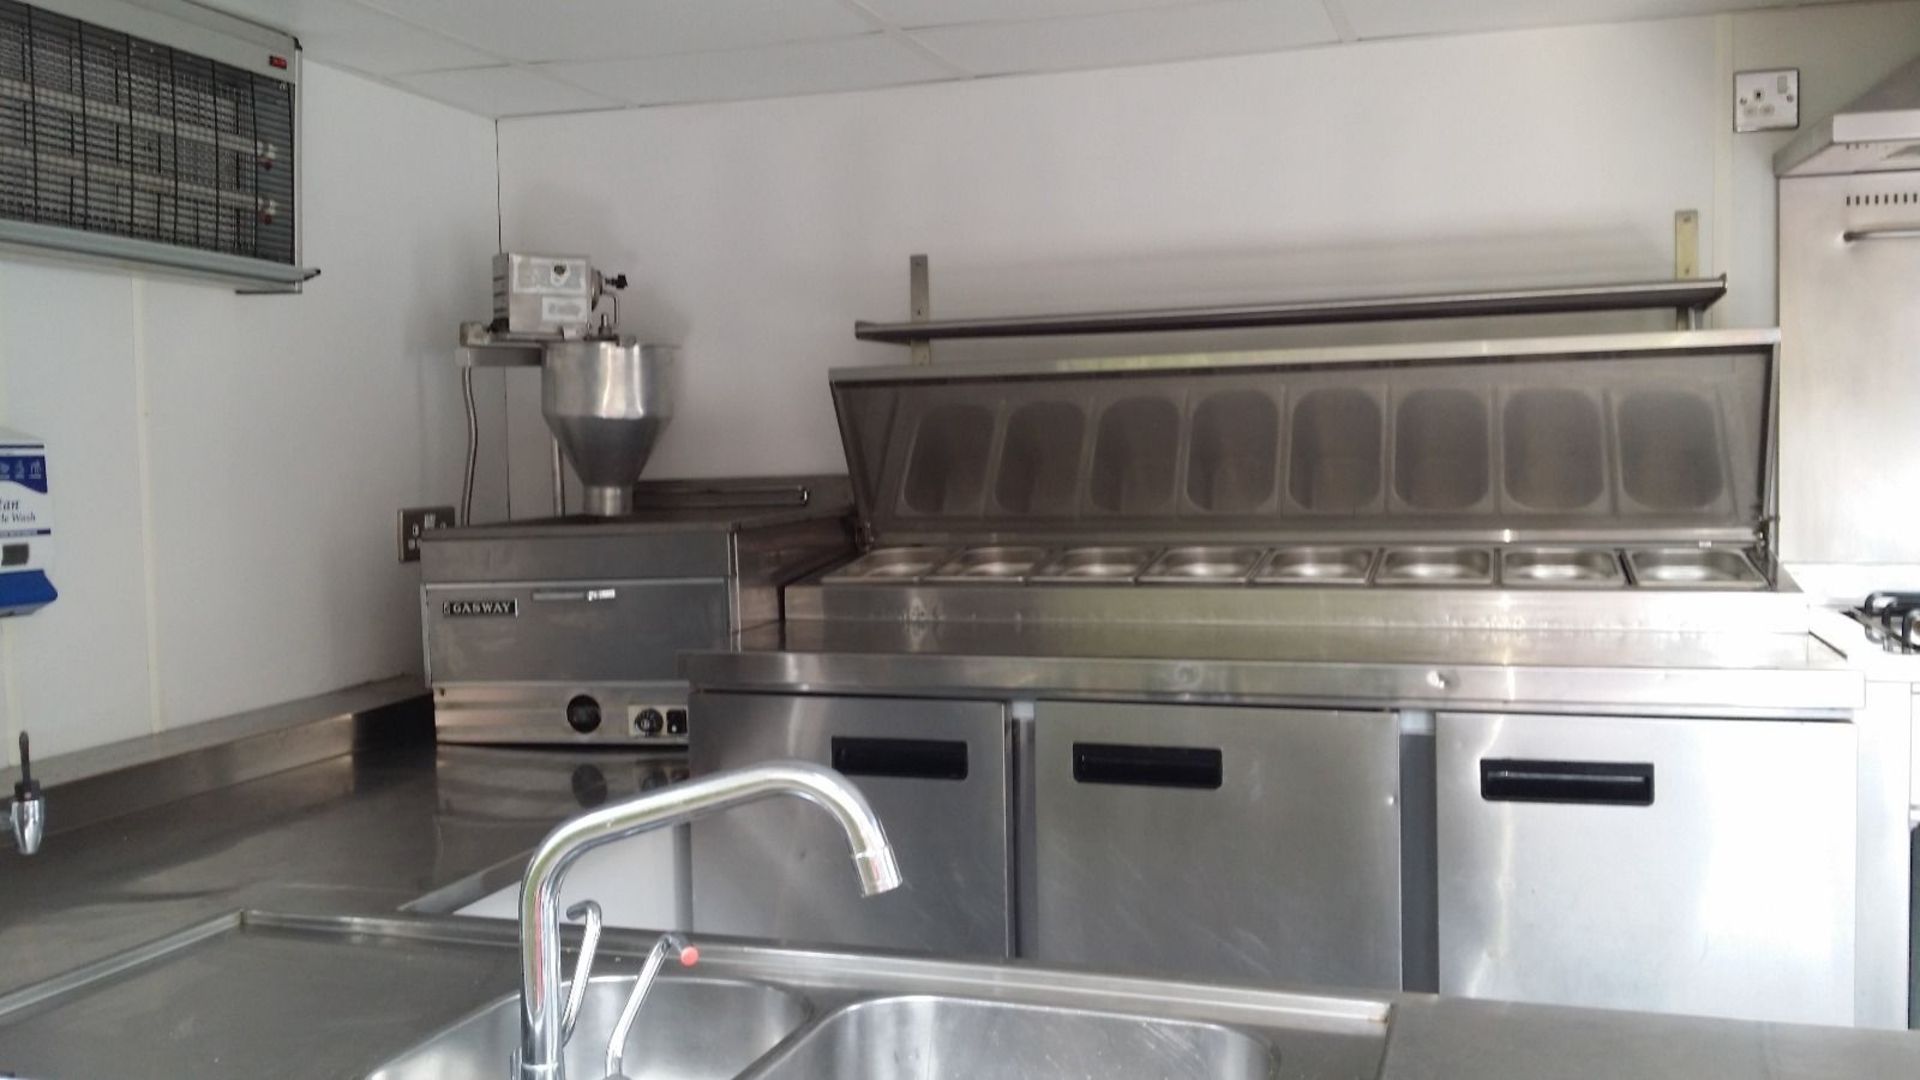 5 Star Rated A Pro Catering Unit Indespension Trailer - Image 4 of 7